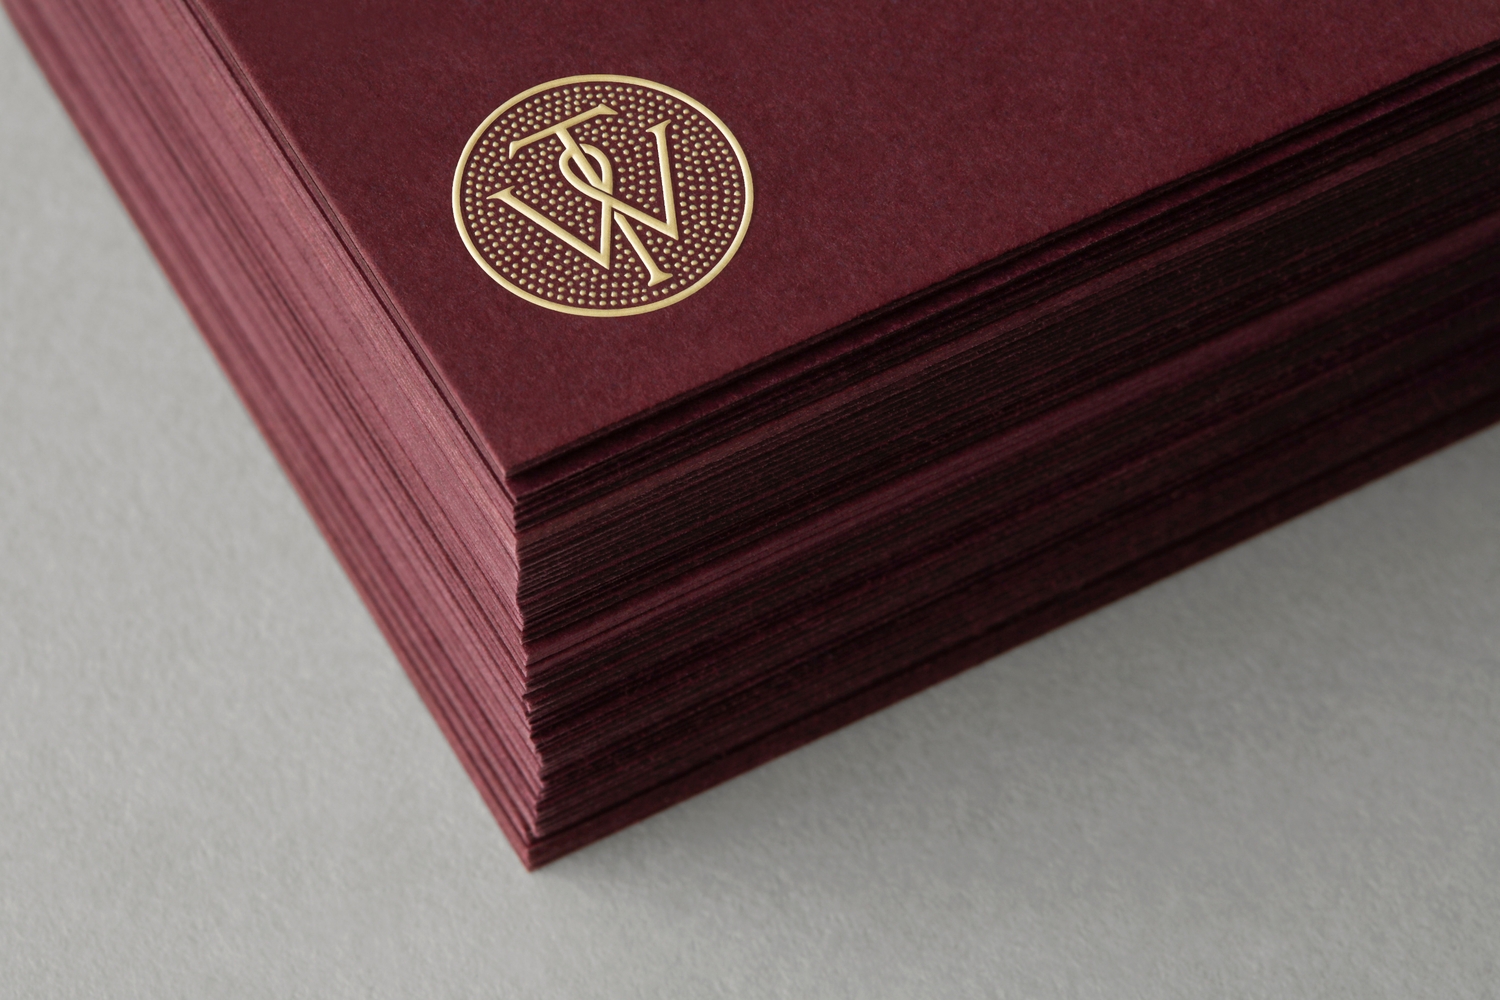 Print featuring Colorplan Claret and a gold foil emboss by Bunch for business consultancy Willow Tree 